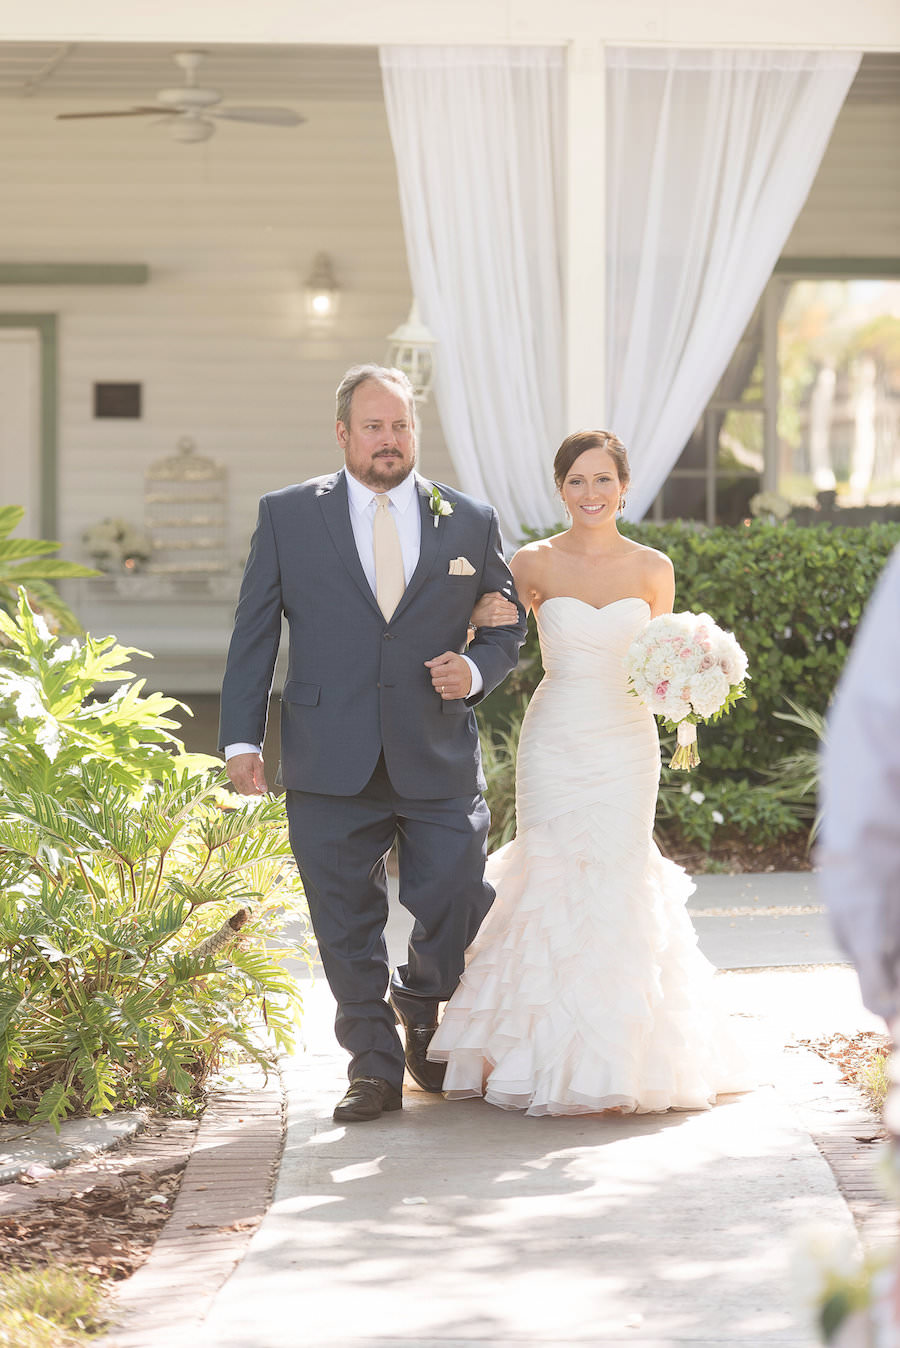 Father and Bride Walking Down the Aisle | Tampa Wedding Photographer Kristen Marie Photography